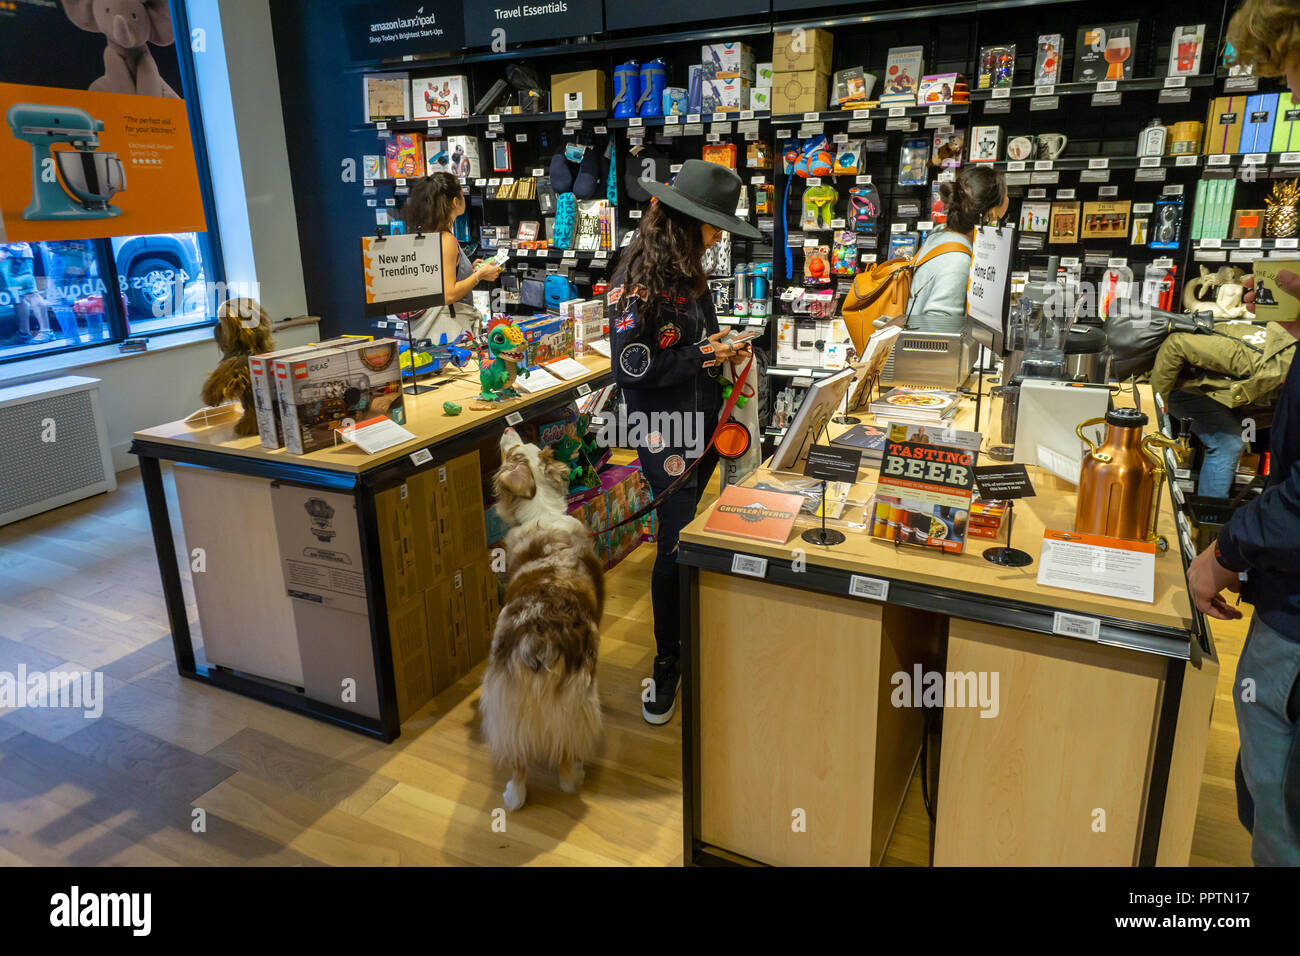 New York, USA. 27th Sept 2018. Customers shop and browse in the new Amazon  4-star store in the Soho shopping district in New York on opening day,  Thursday, September 27, 2018. The